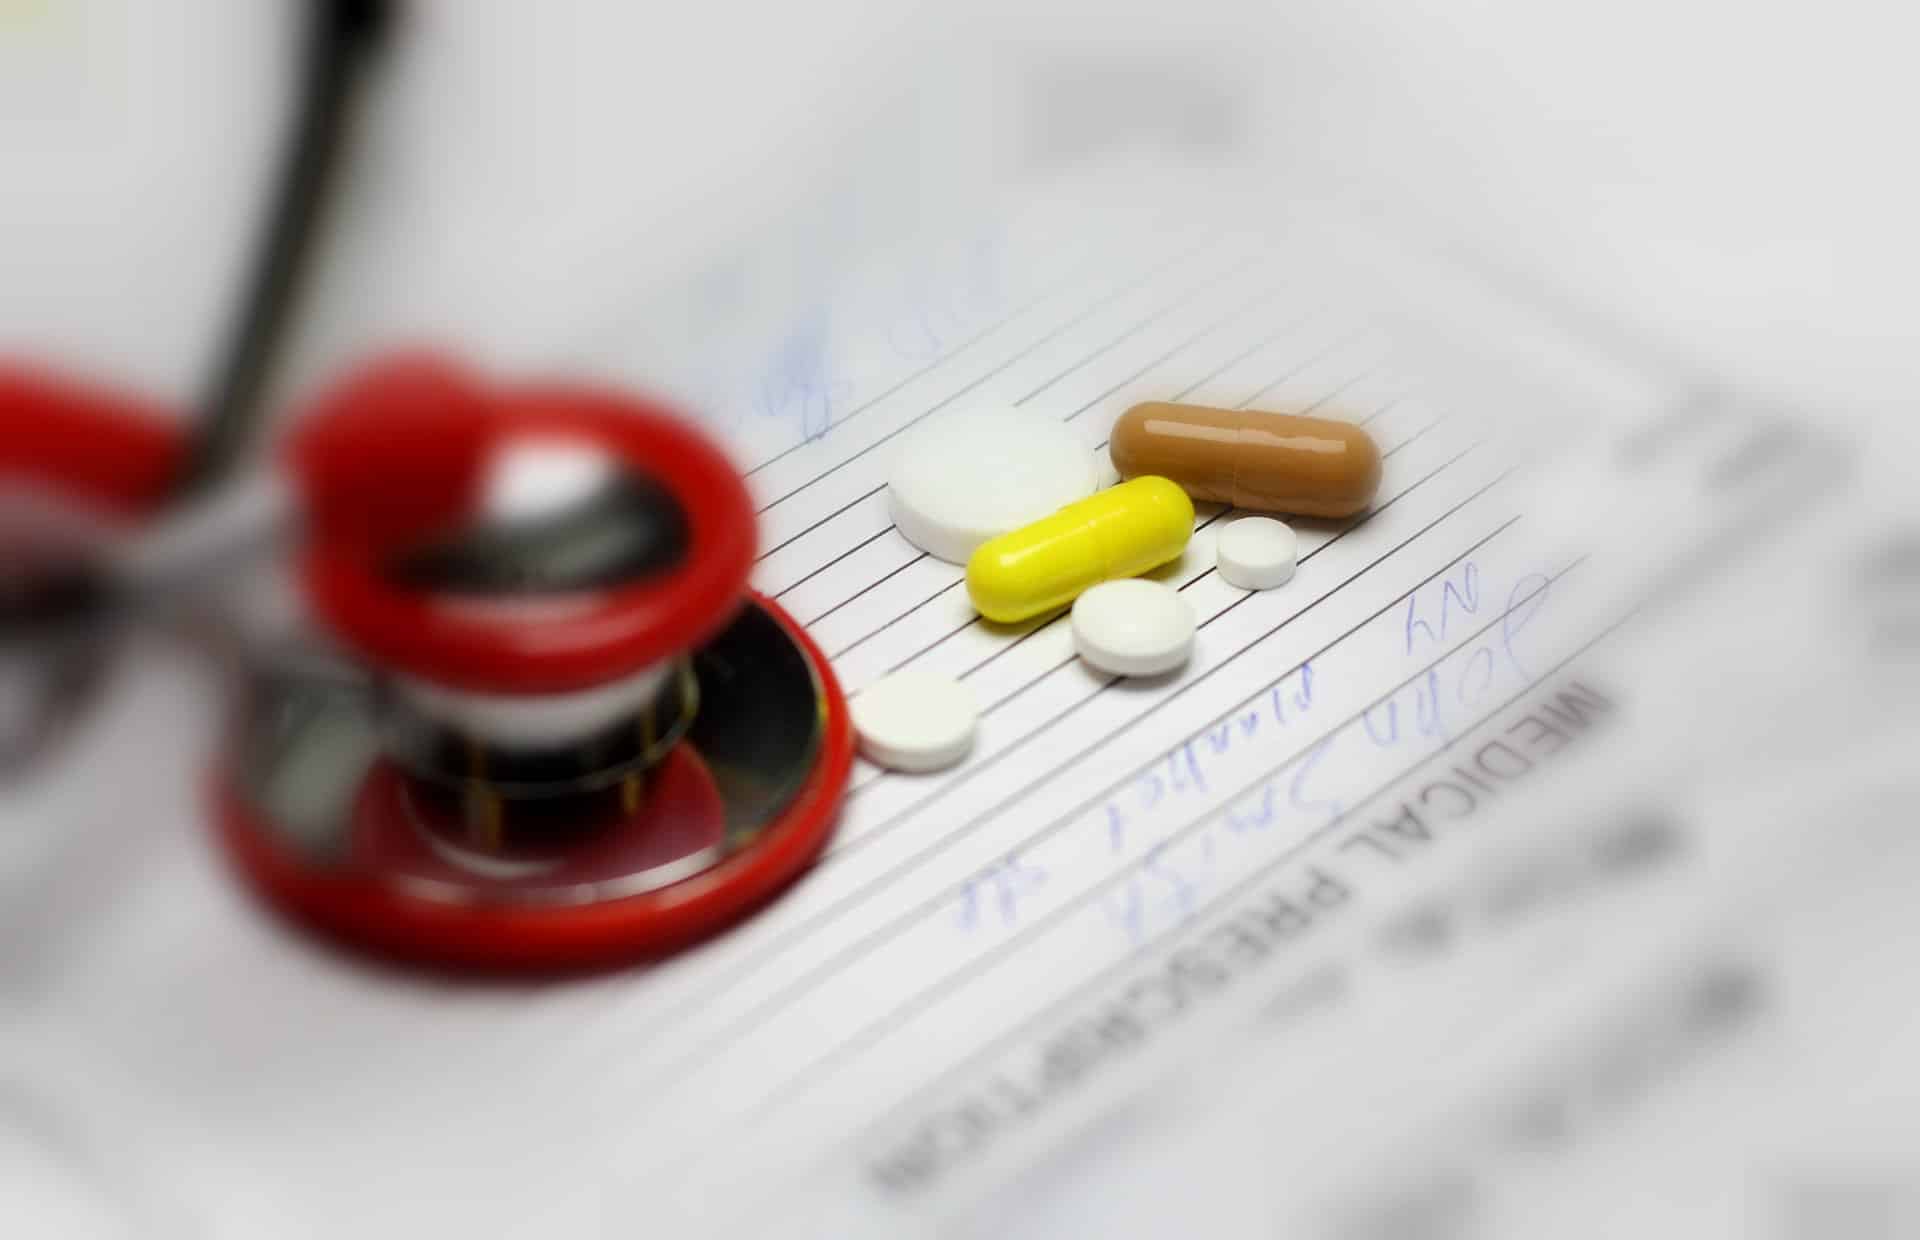 Stethoscope next to pills on top of papers